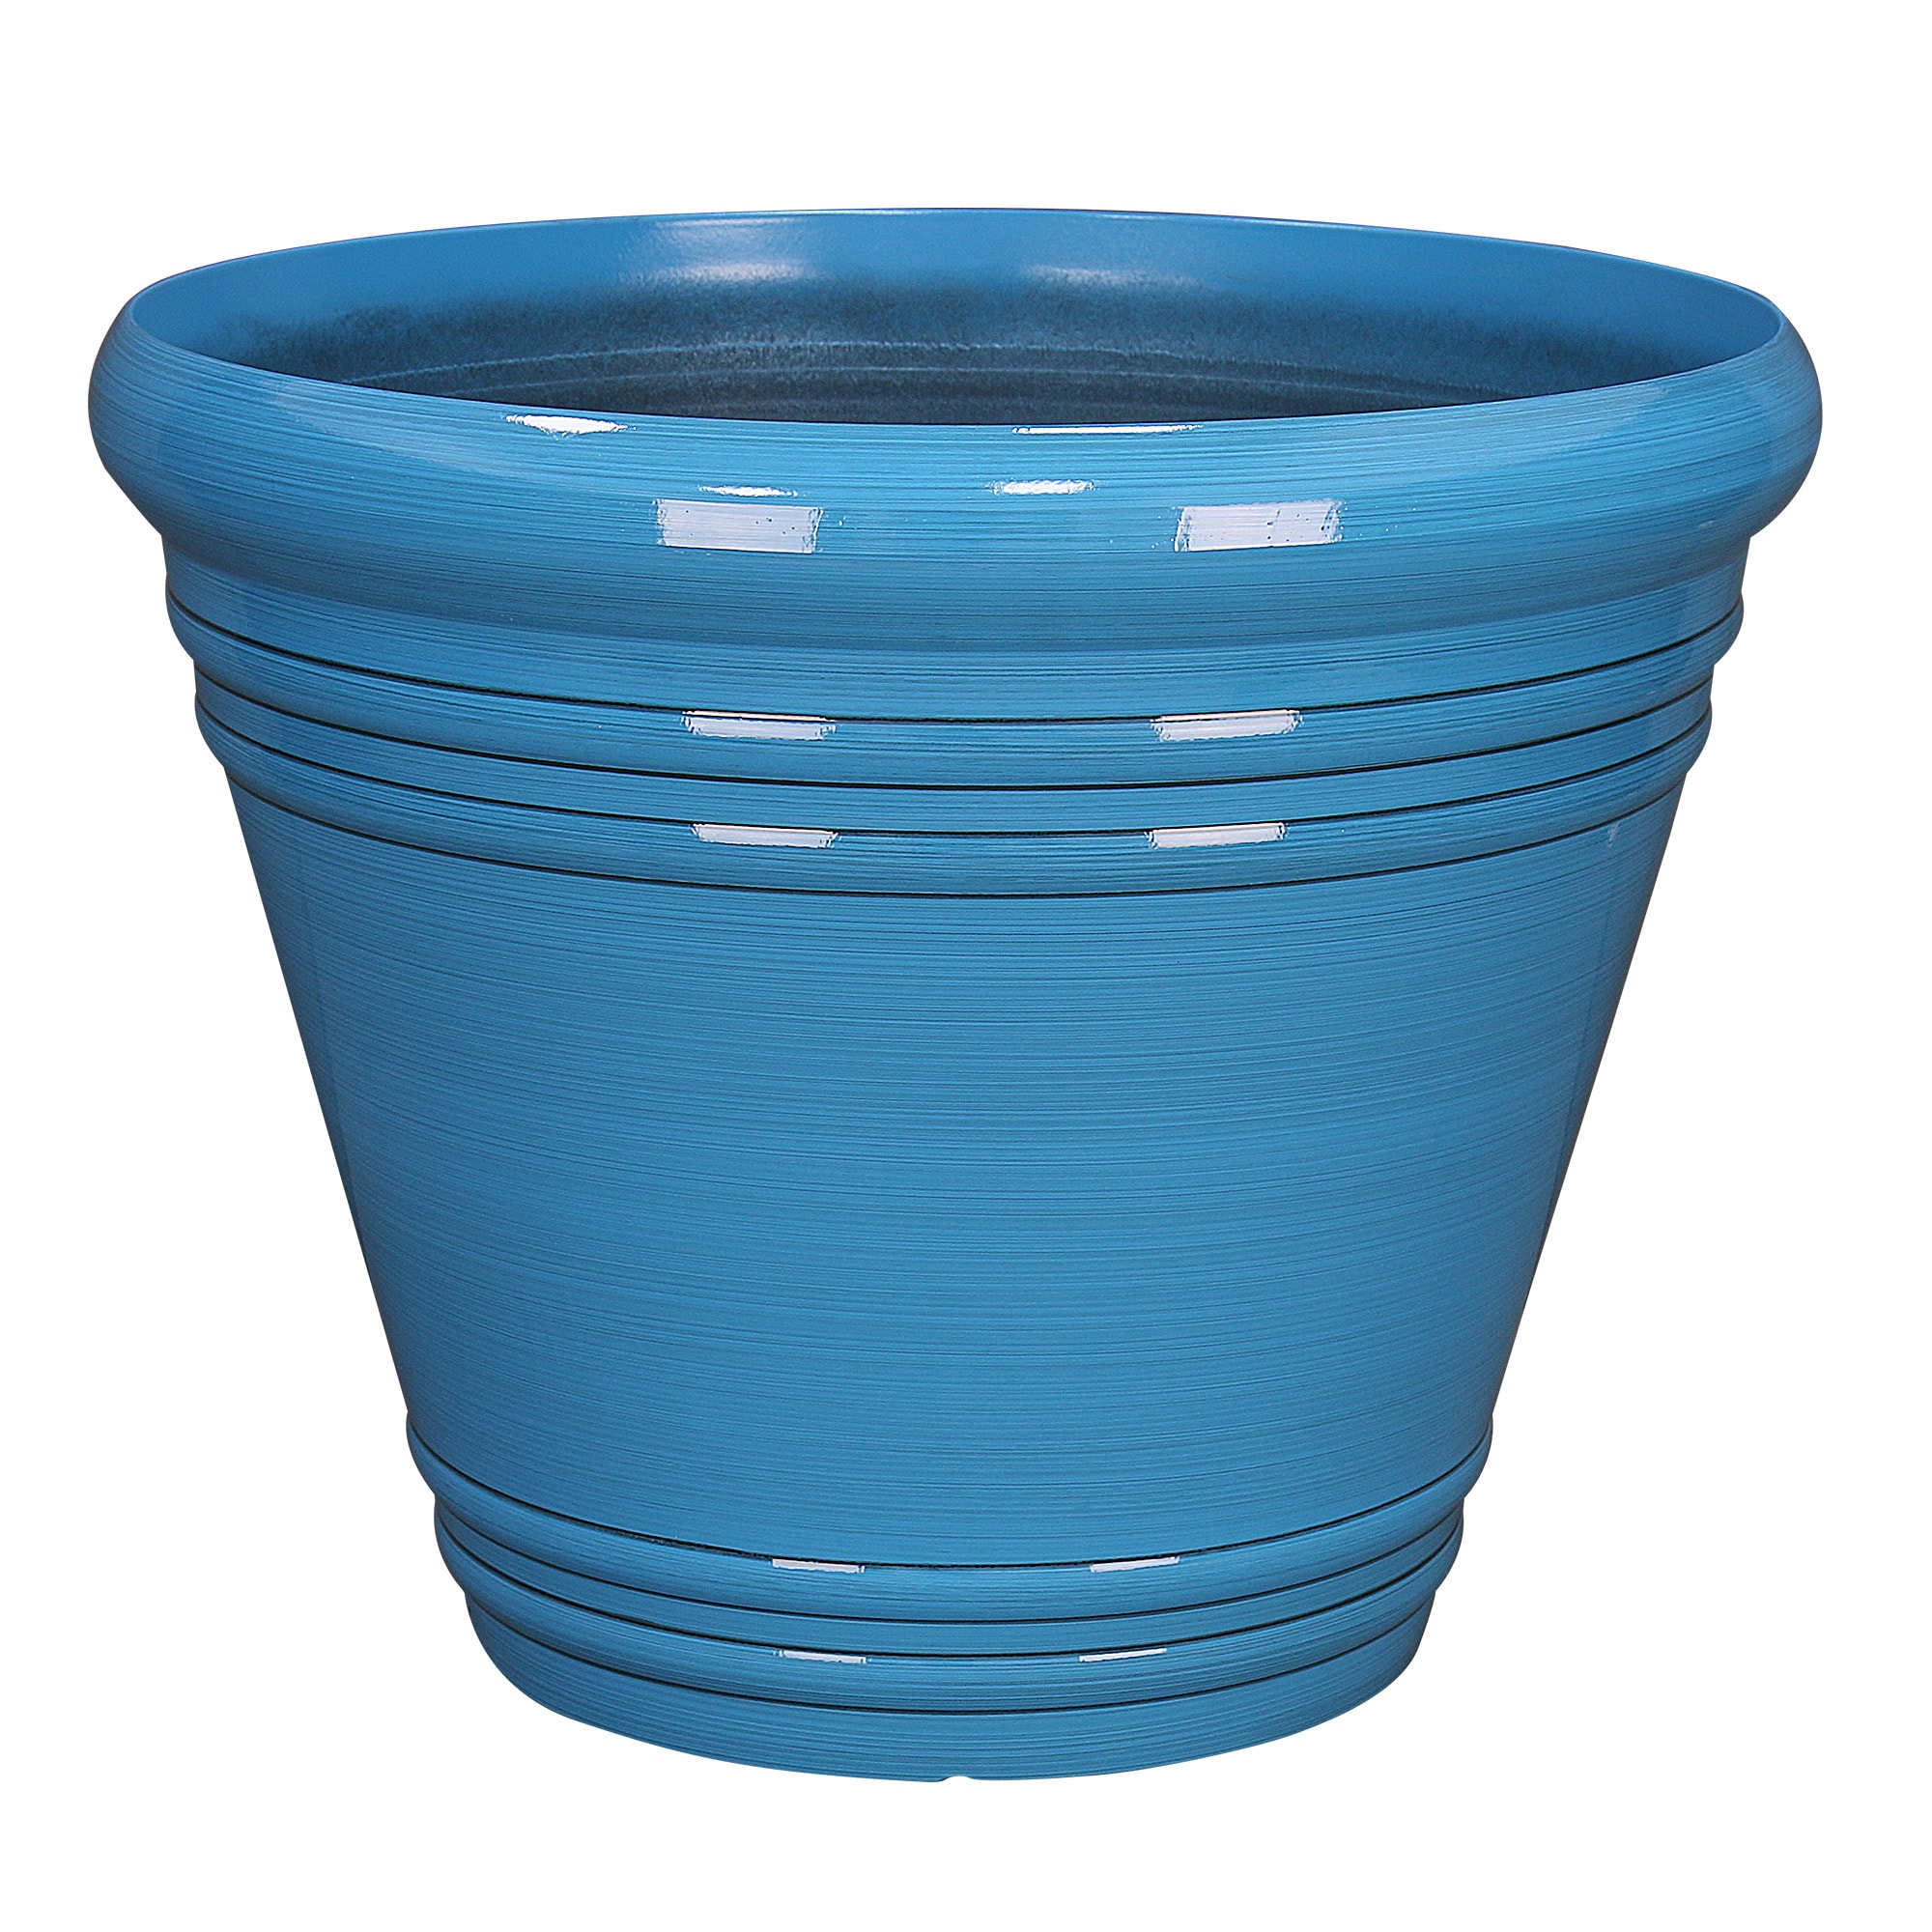 Details about   Large Blue Resin Planter 18.58-in W x 17.32-in H Flute Round Bell Planter 